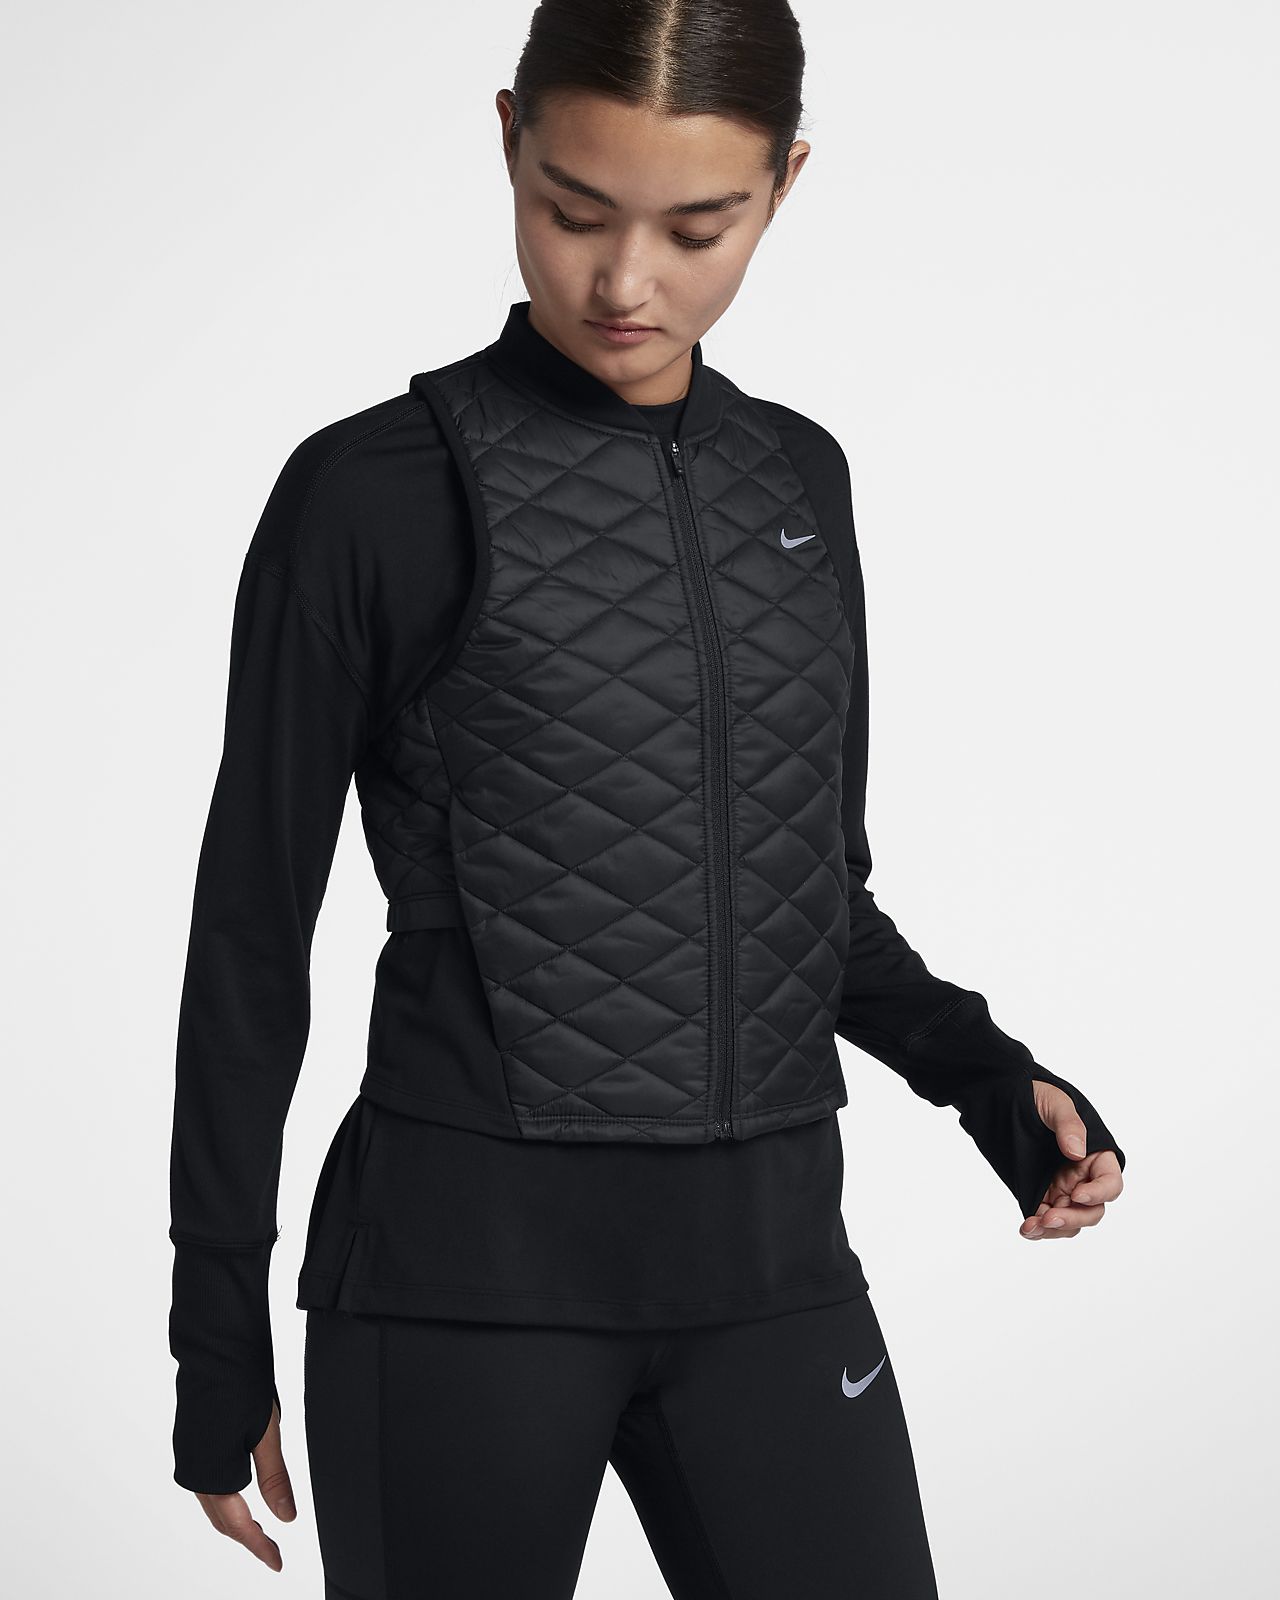 Chaleco Nike Mujer Gris Sales, 60% OFF |